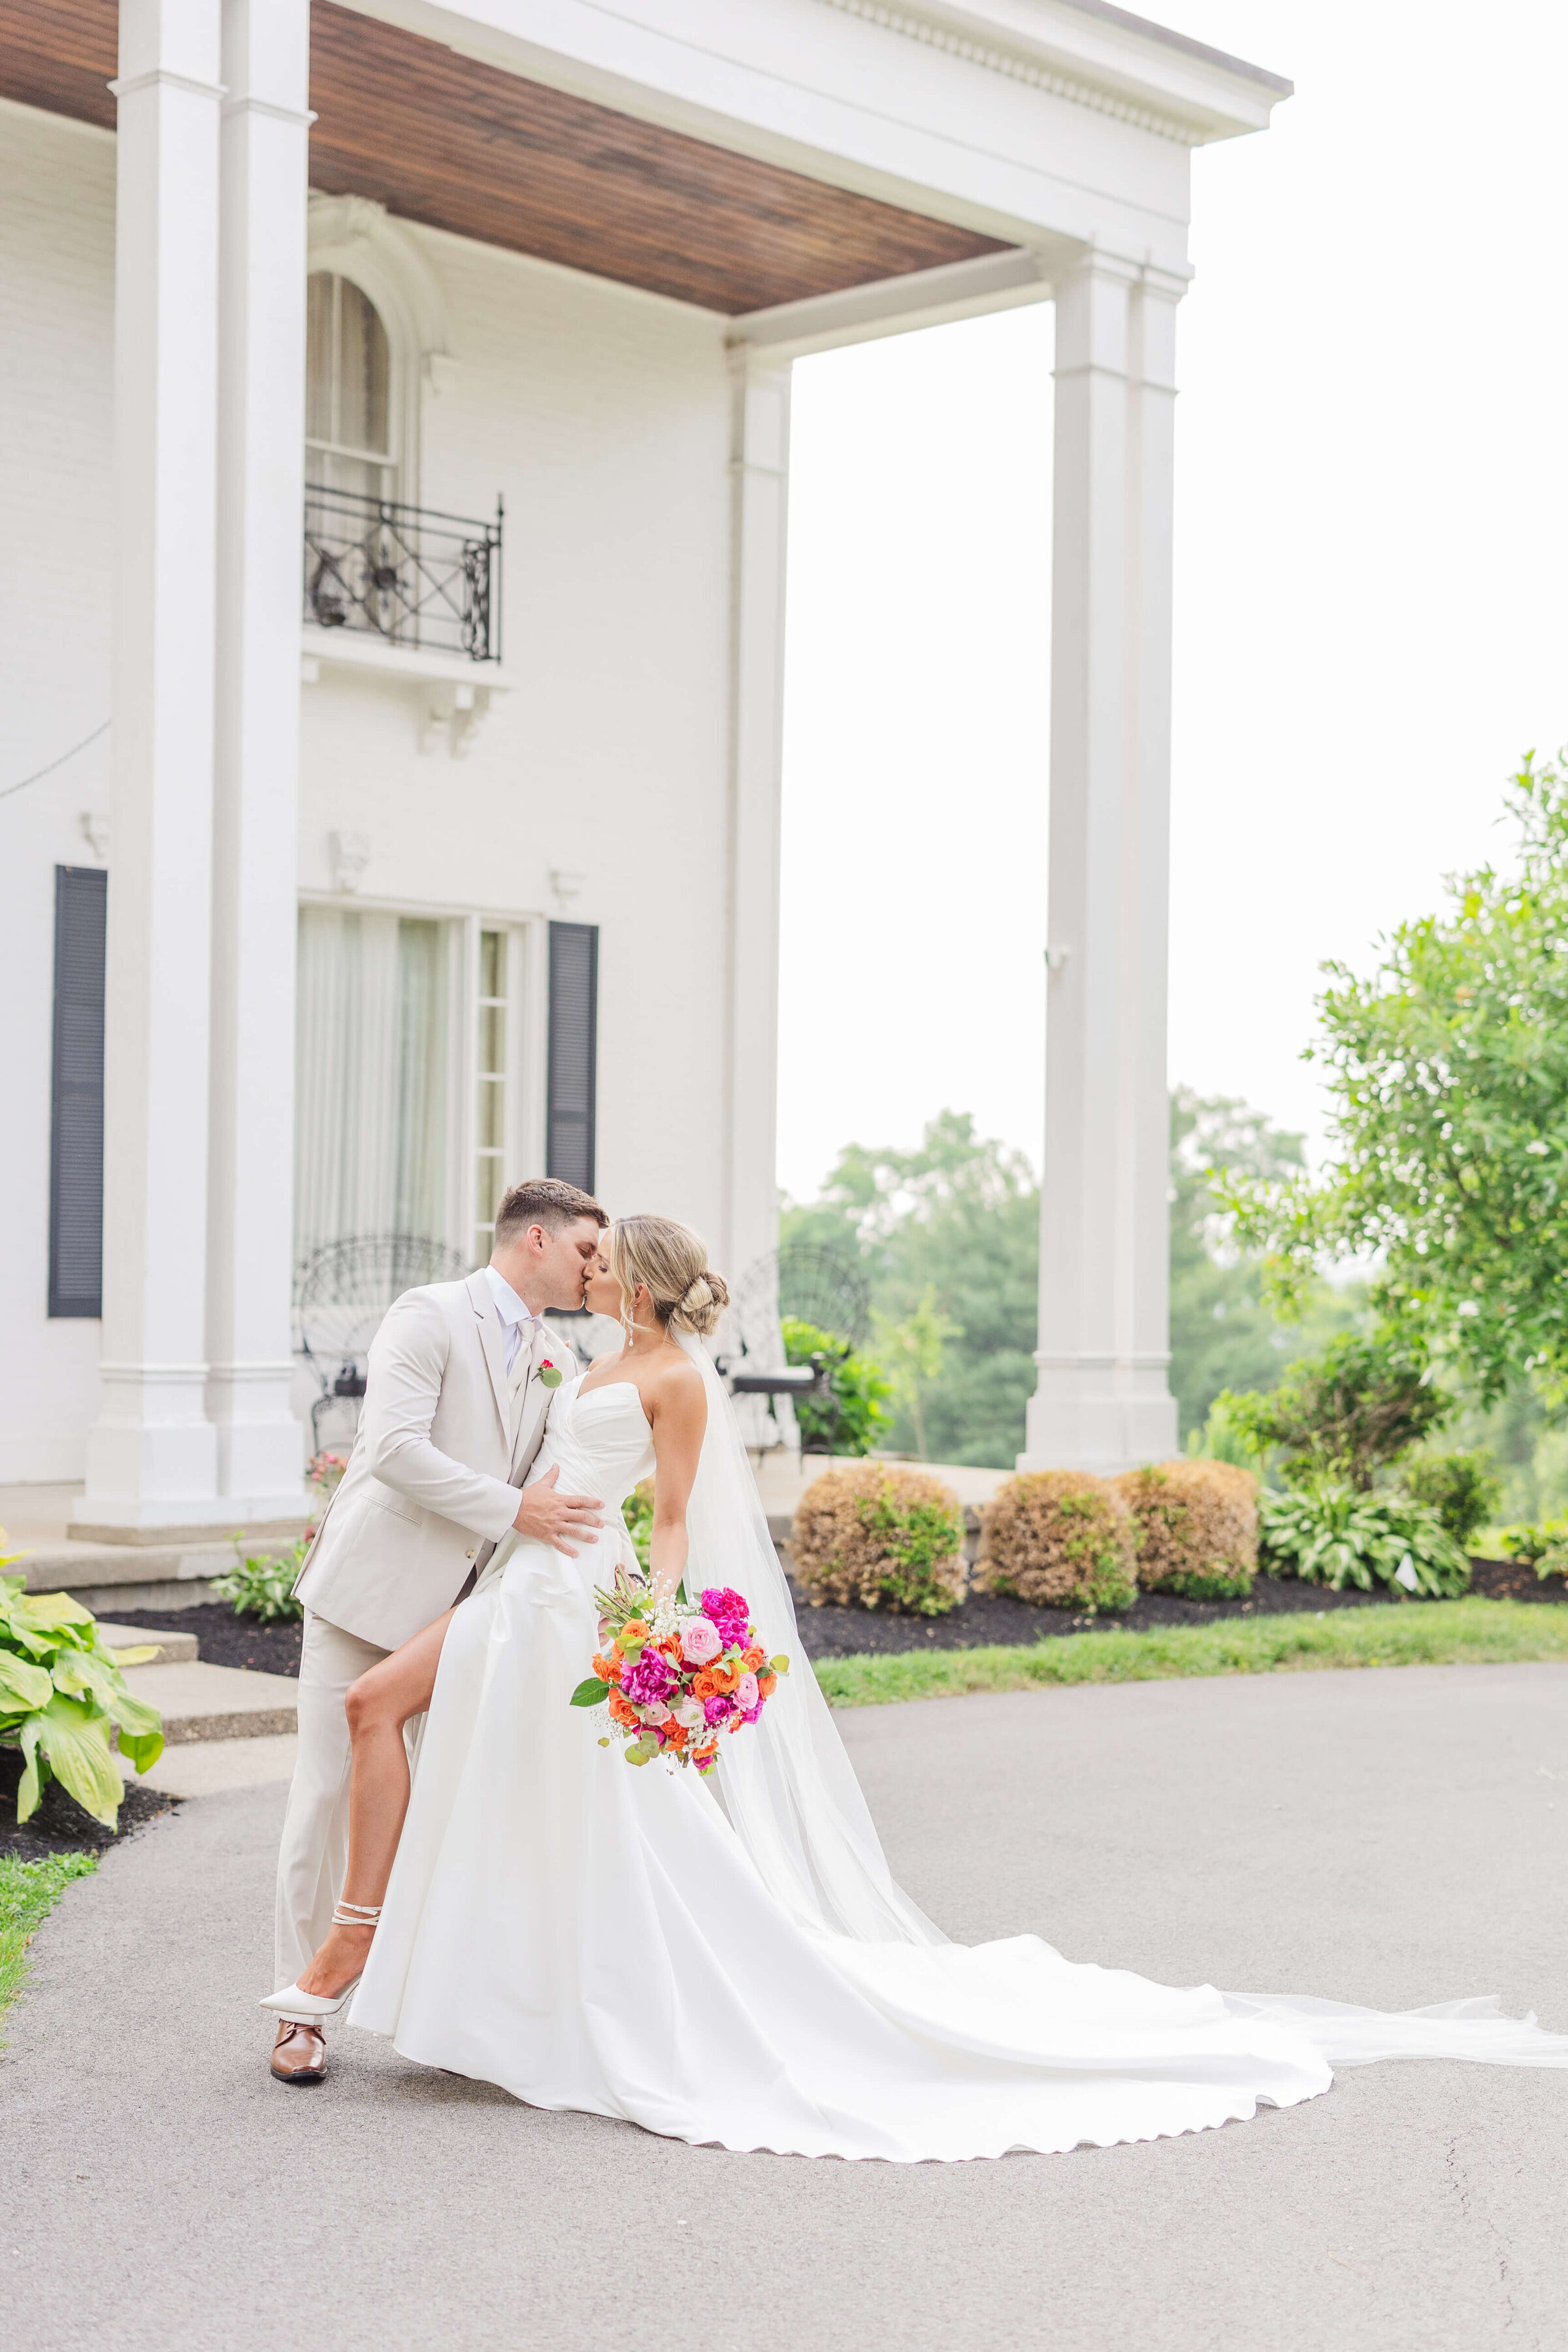 A groom in a tan suit dips his bride back for a kiss. They are standing in front of a white mansion outside. It's summertime and the trees are green and the sun is glowing. She's holding a bright pink bouquet.